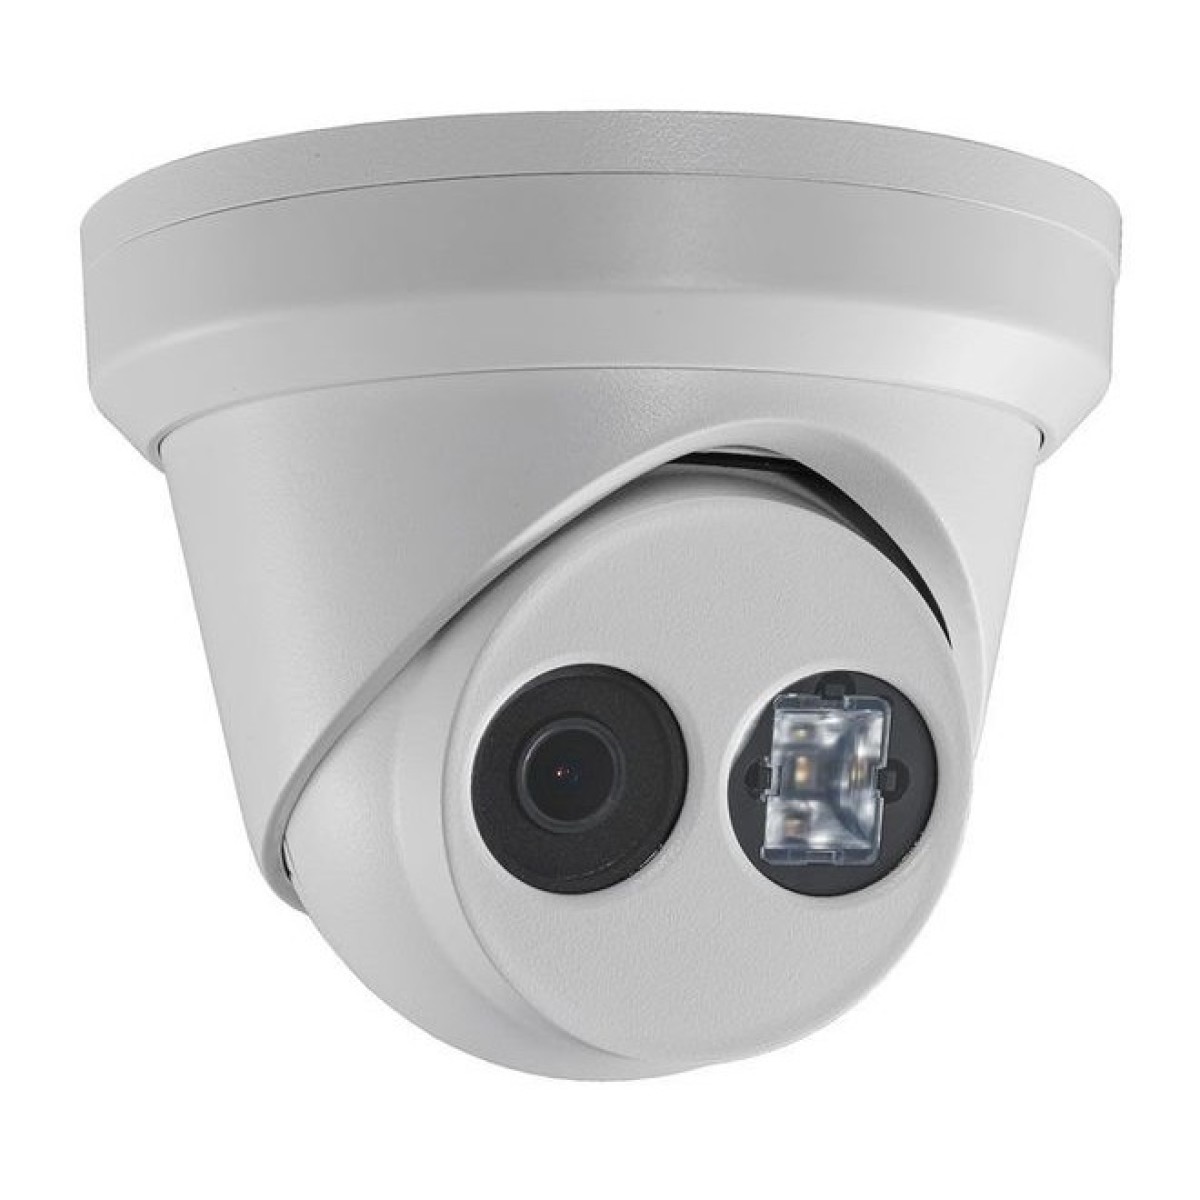 IP-камера Hikvision DS-2CD2335FWD-I (2.8) 98_98.jpg